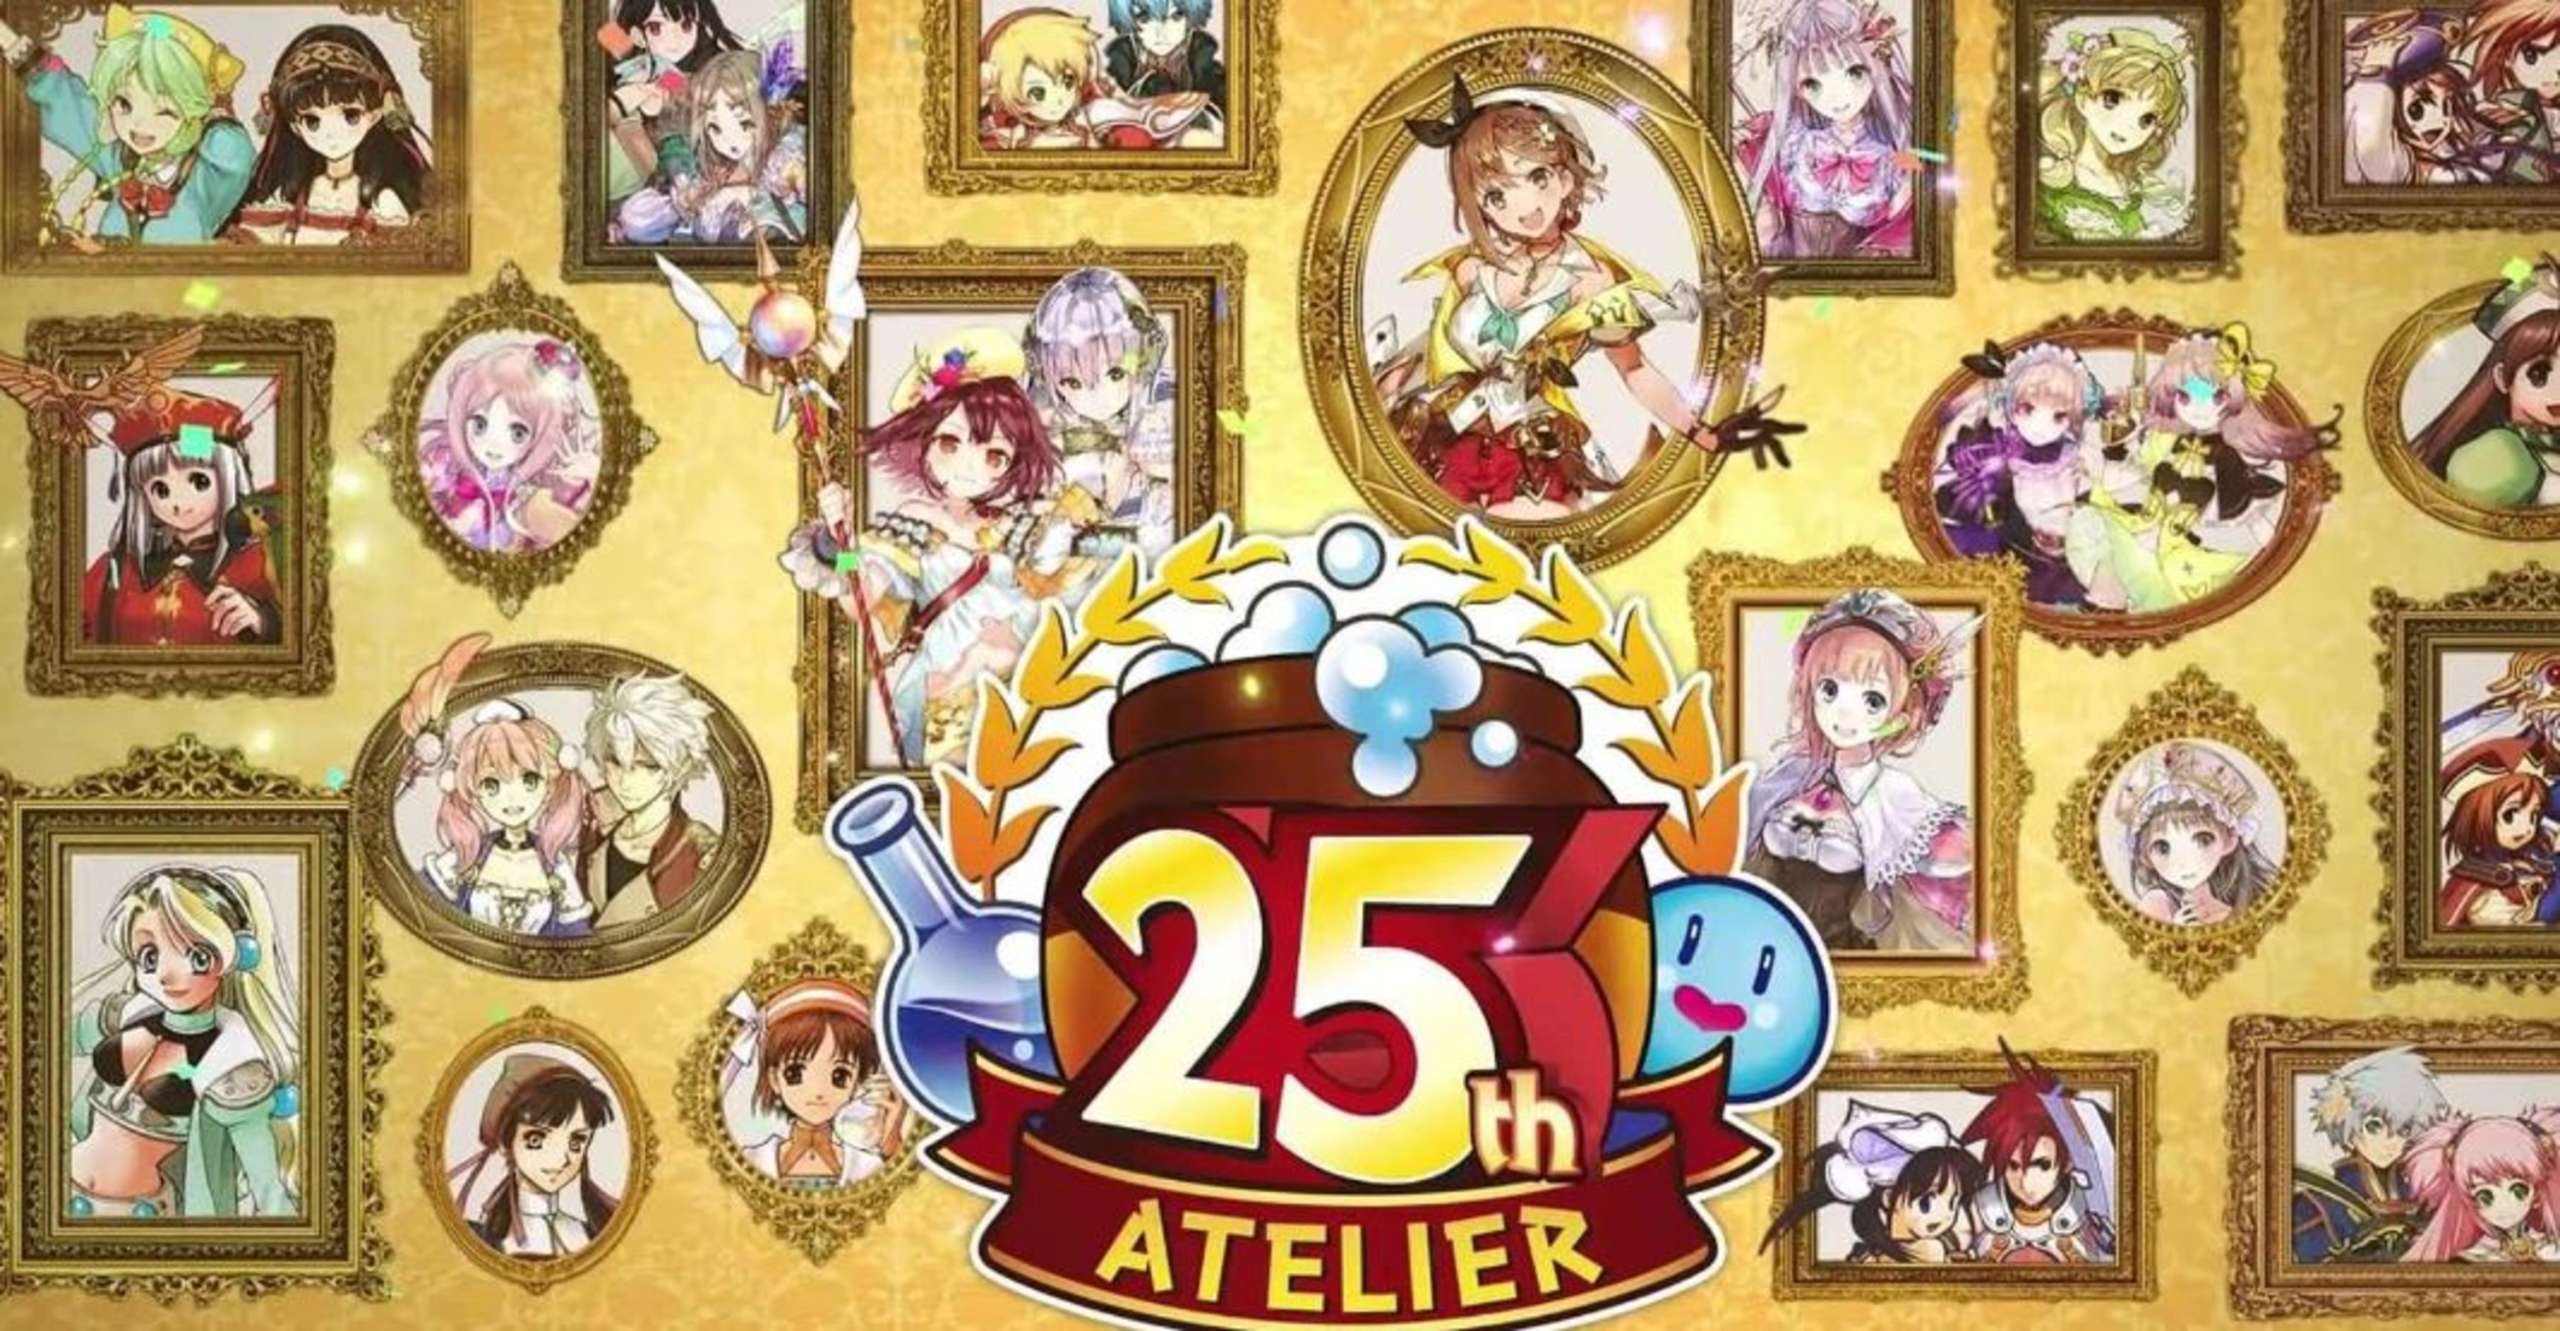 A New Trailer For An Upcoming RPG Instalment Has Been Released By Koei Tecmo In Honour Of The 25th Anniversary Of The Atelier Video Games